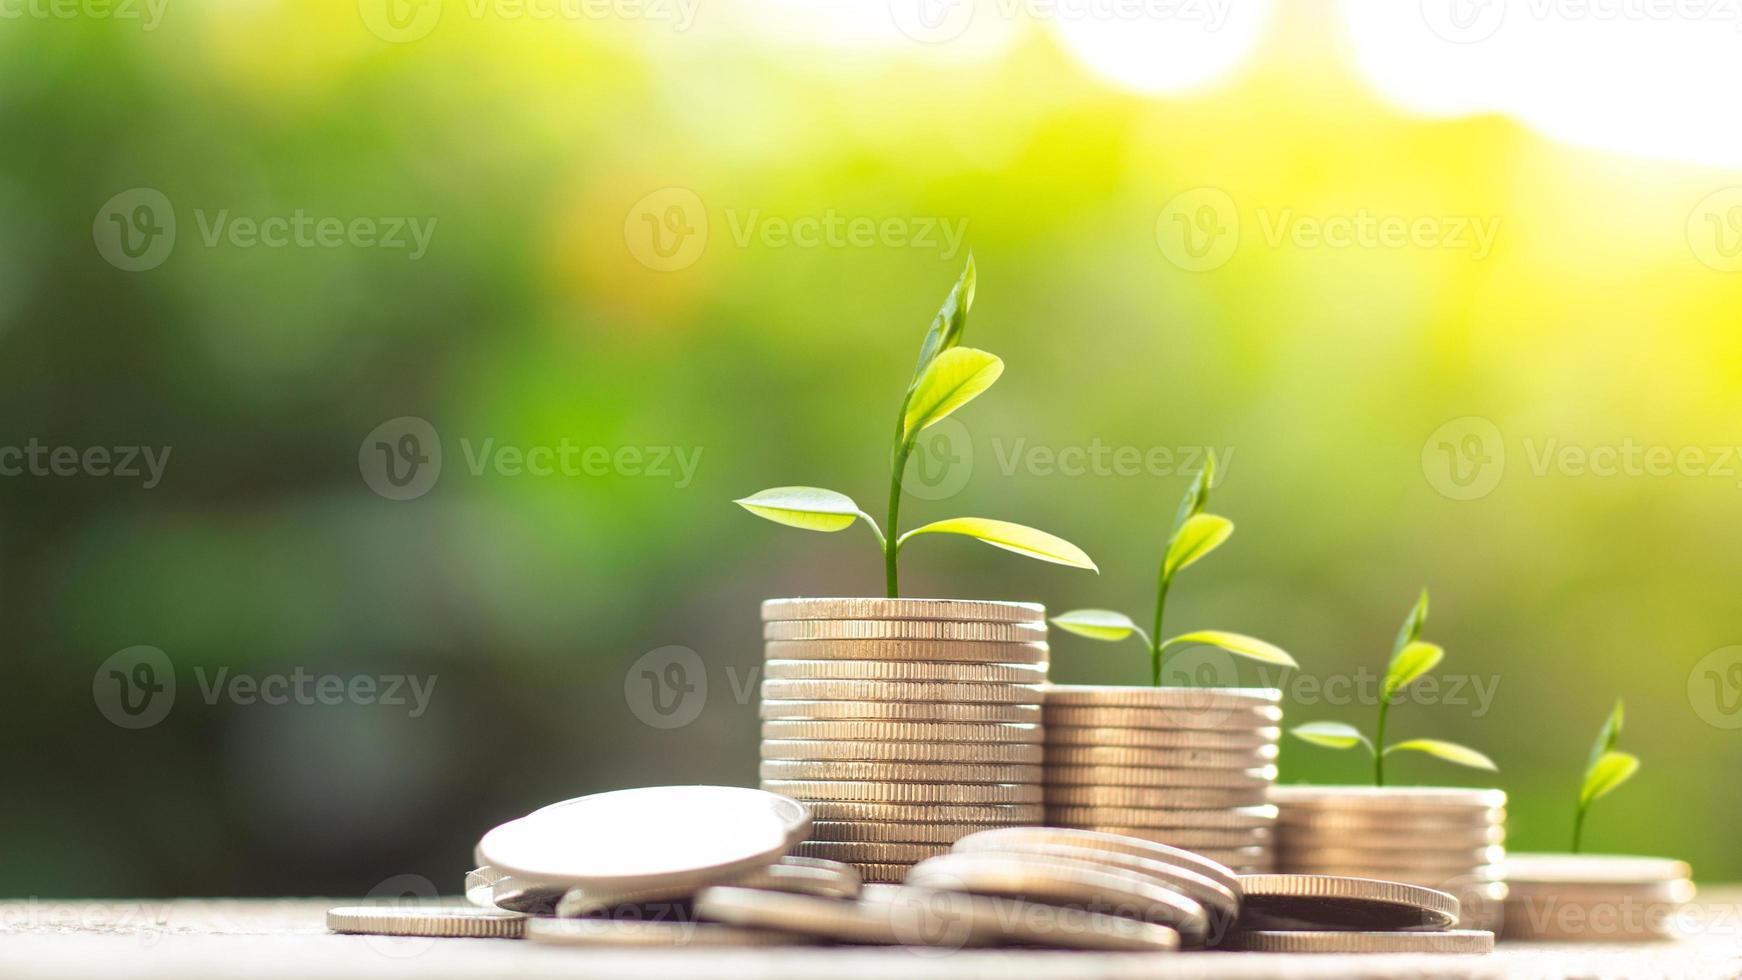 The tree is growing on top a pile of coins with blurred green nature background, Money growing concept and sustainable investment, Business success and financial concept,  Banking and economy idea photo